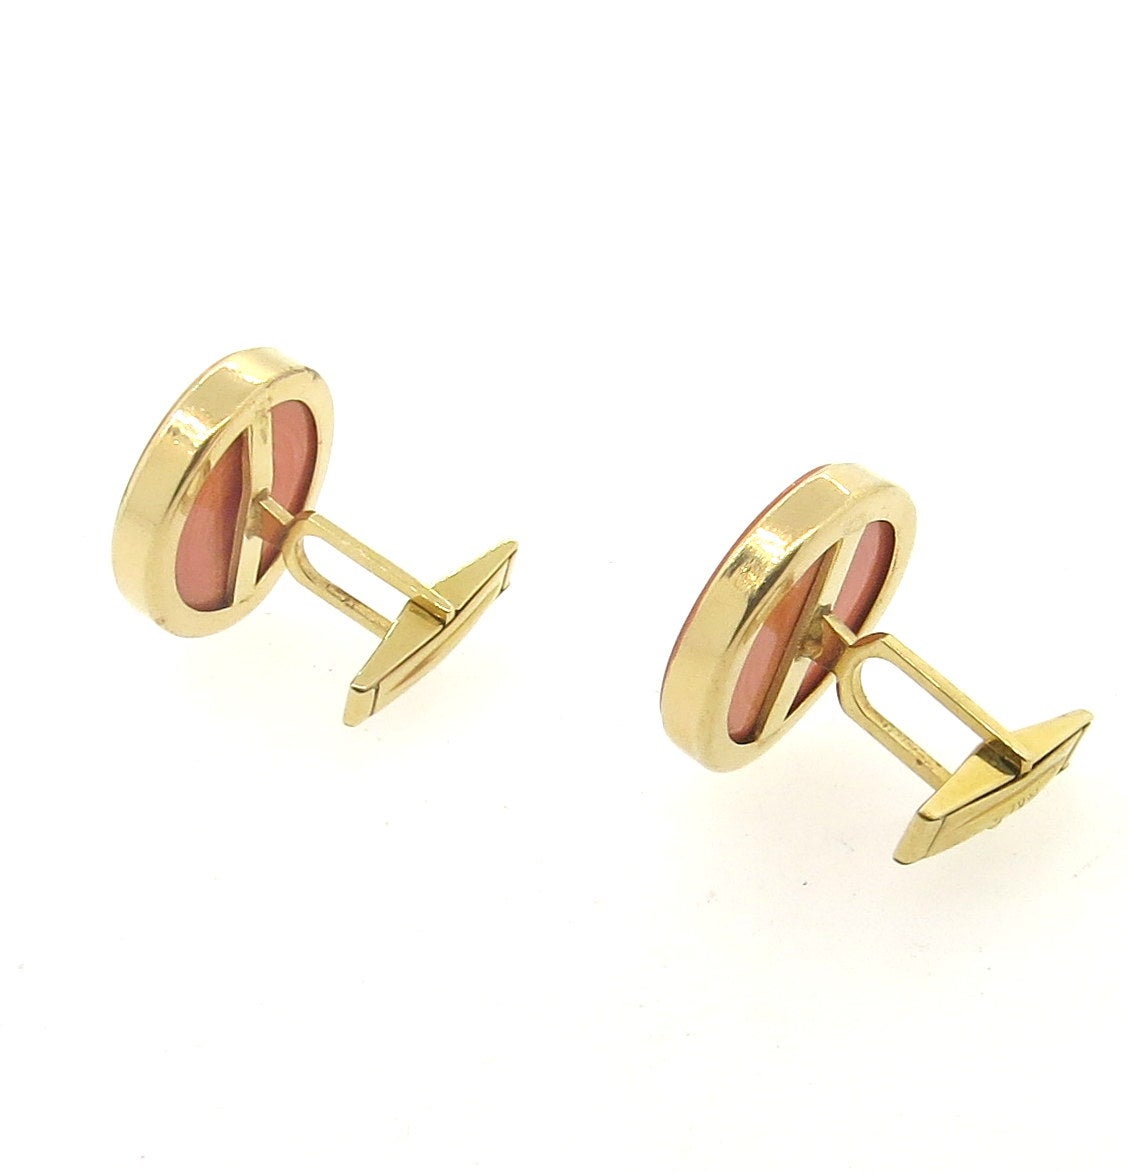 Large 14k yellow gold cufflinks, set with coral gemstones. Cufflink top measures 21mm x 21mm. Weight - 13 grams